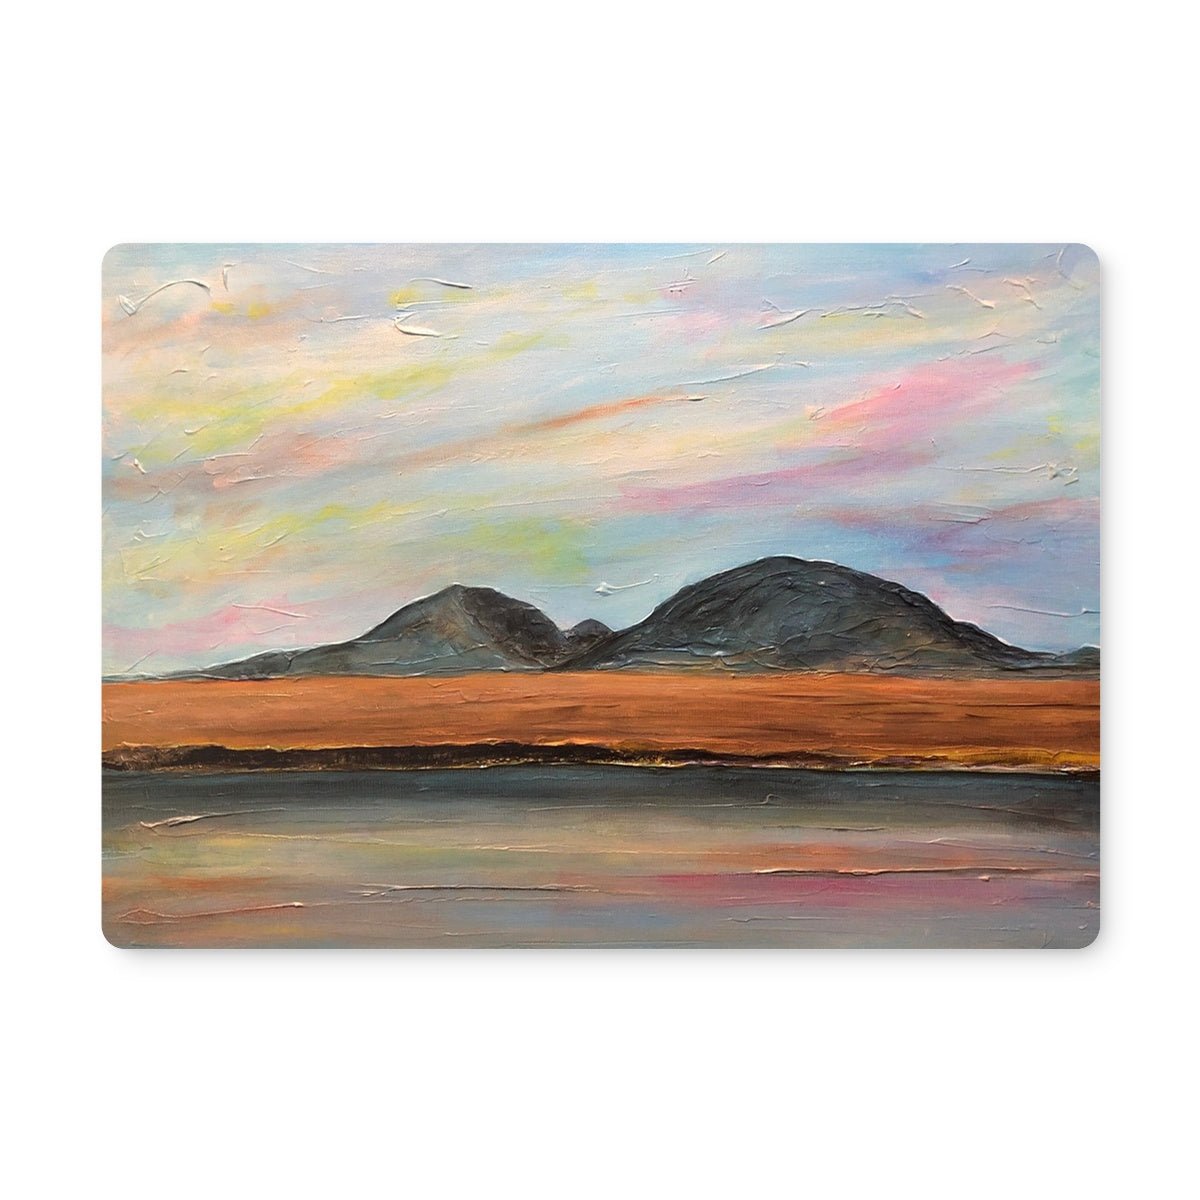 Jura Dawn Art Gifts Placemat-Placemats-Hebridean Islands Art Gallery-4 Placemats-Paintings, Prints, Homeware, Art Gifts From Scotland By Scottish Artist Kevin Hunter